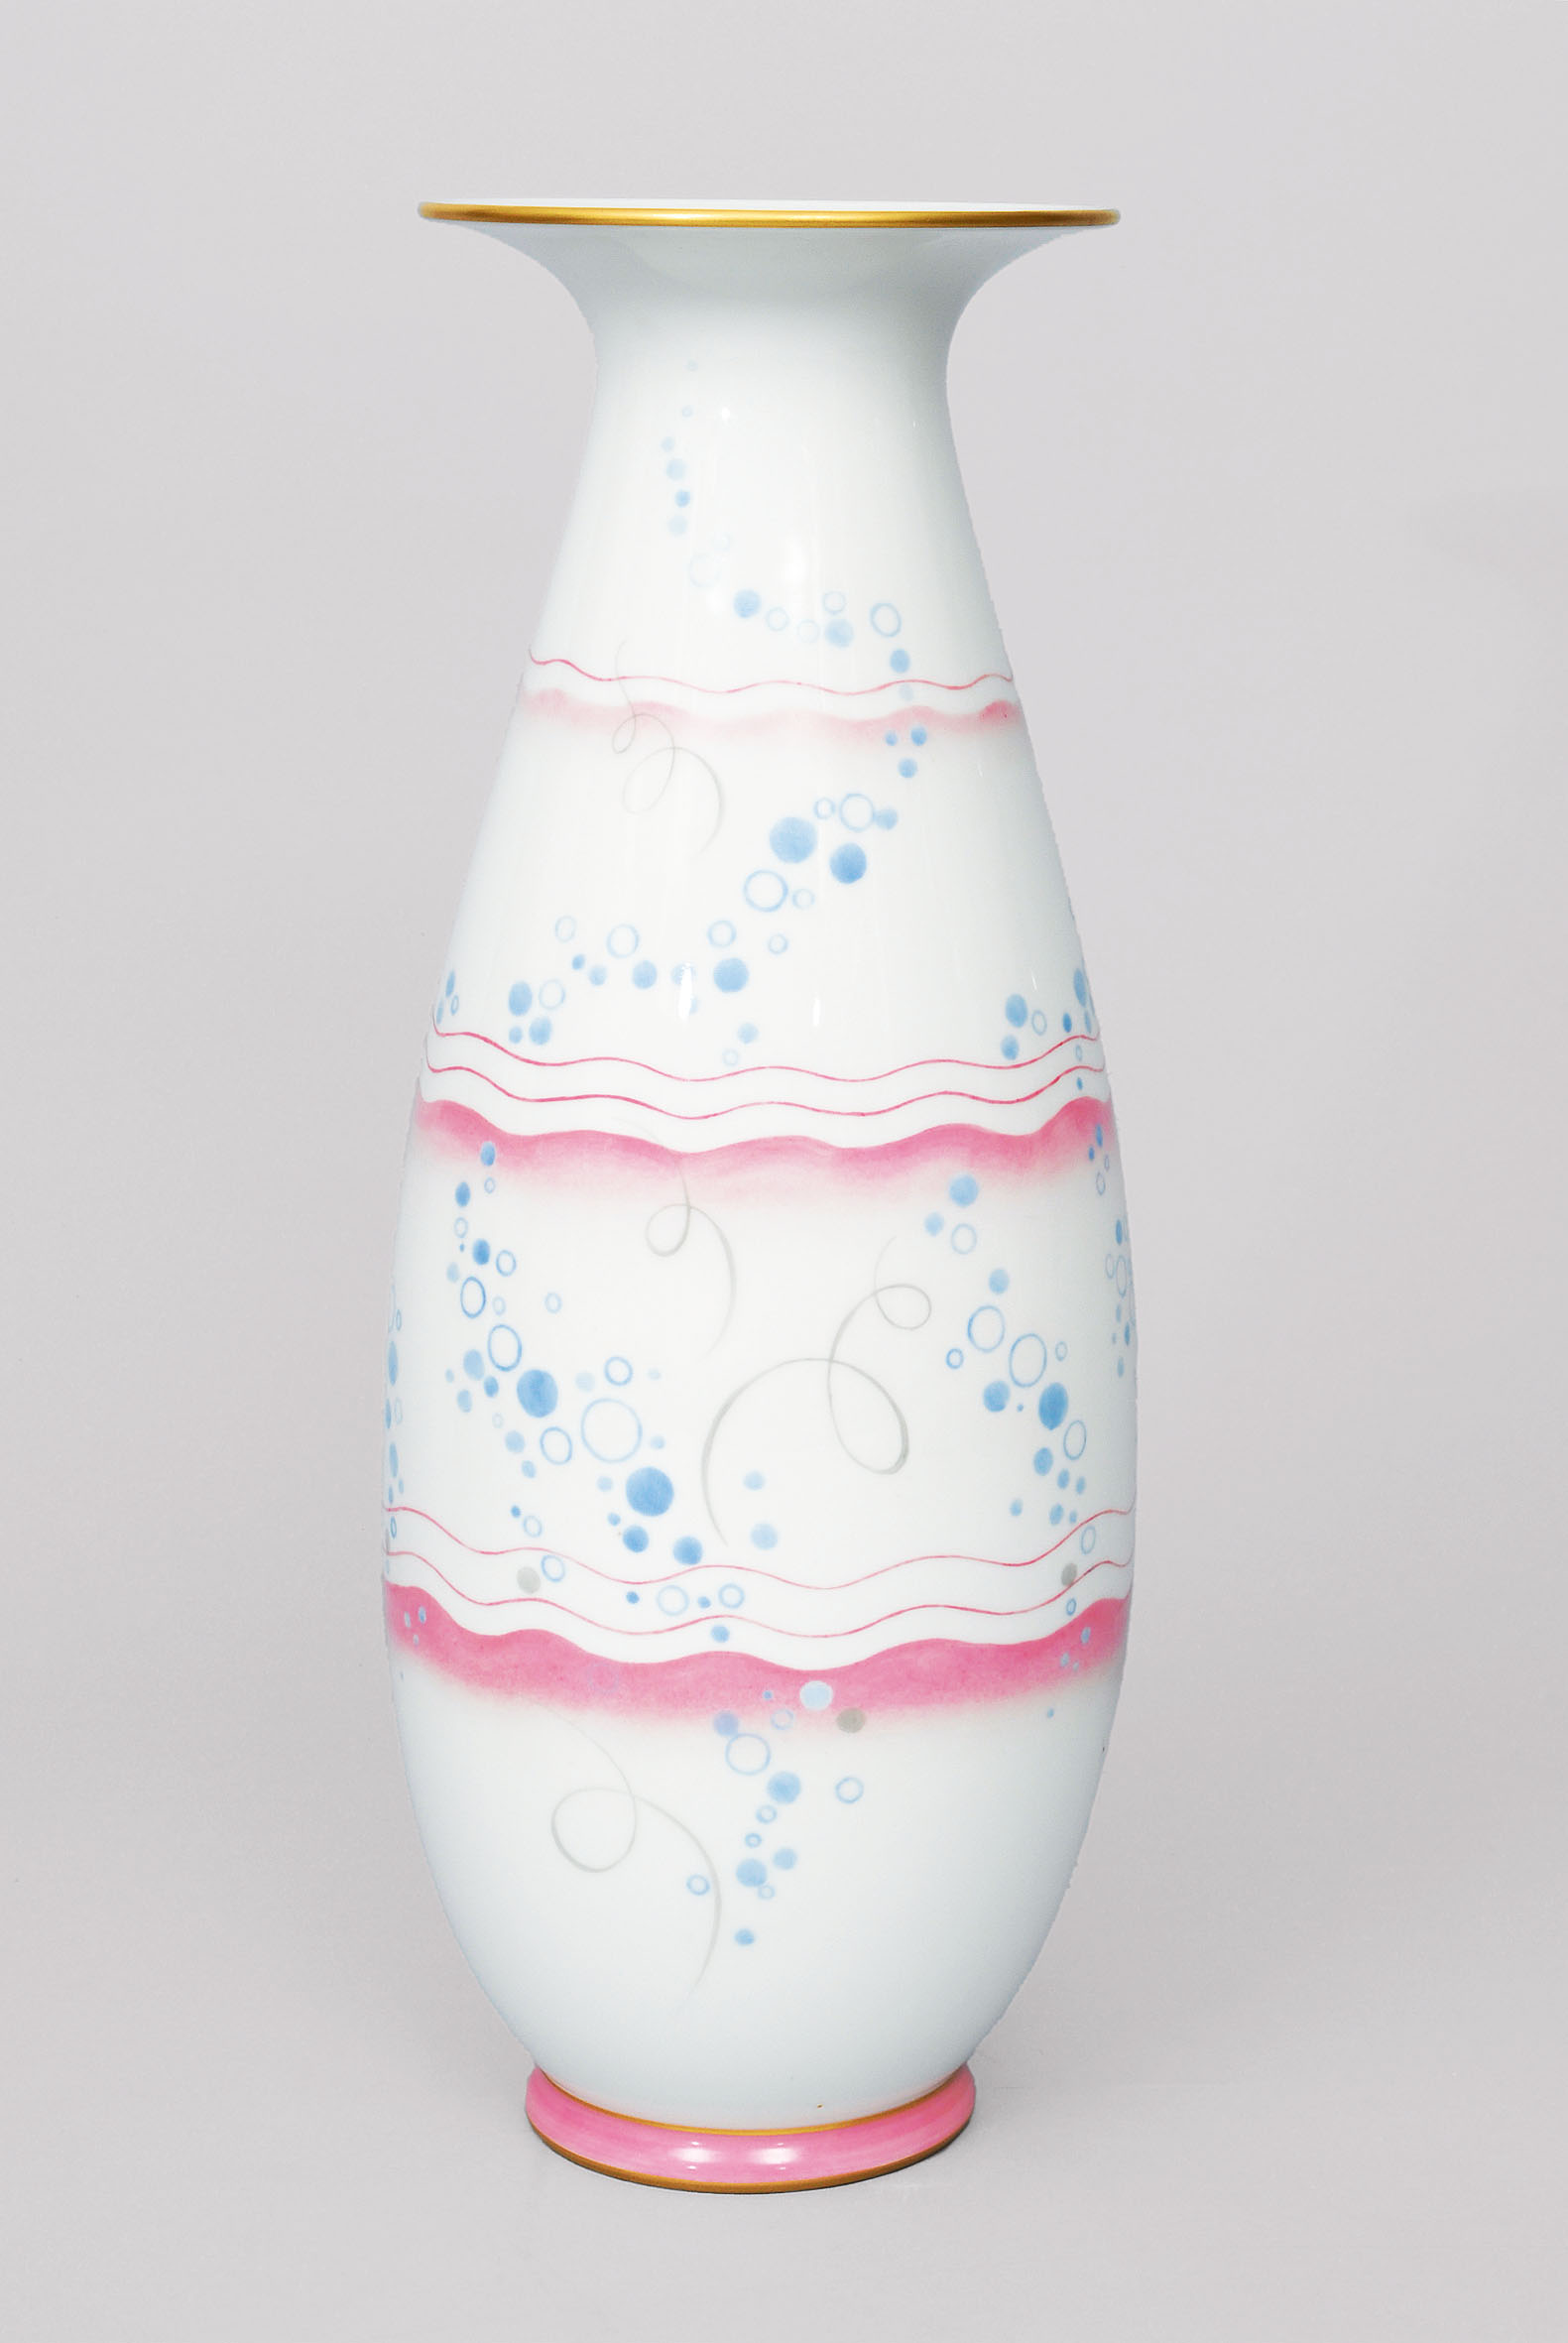 A vase with waveline and bubble decoration